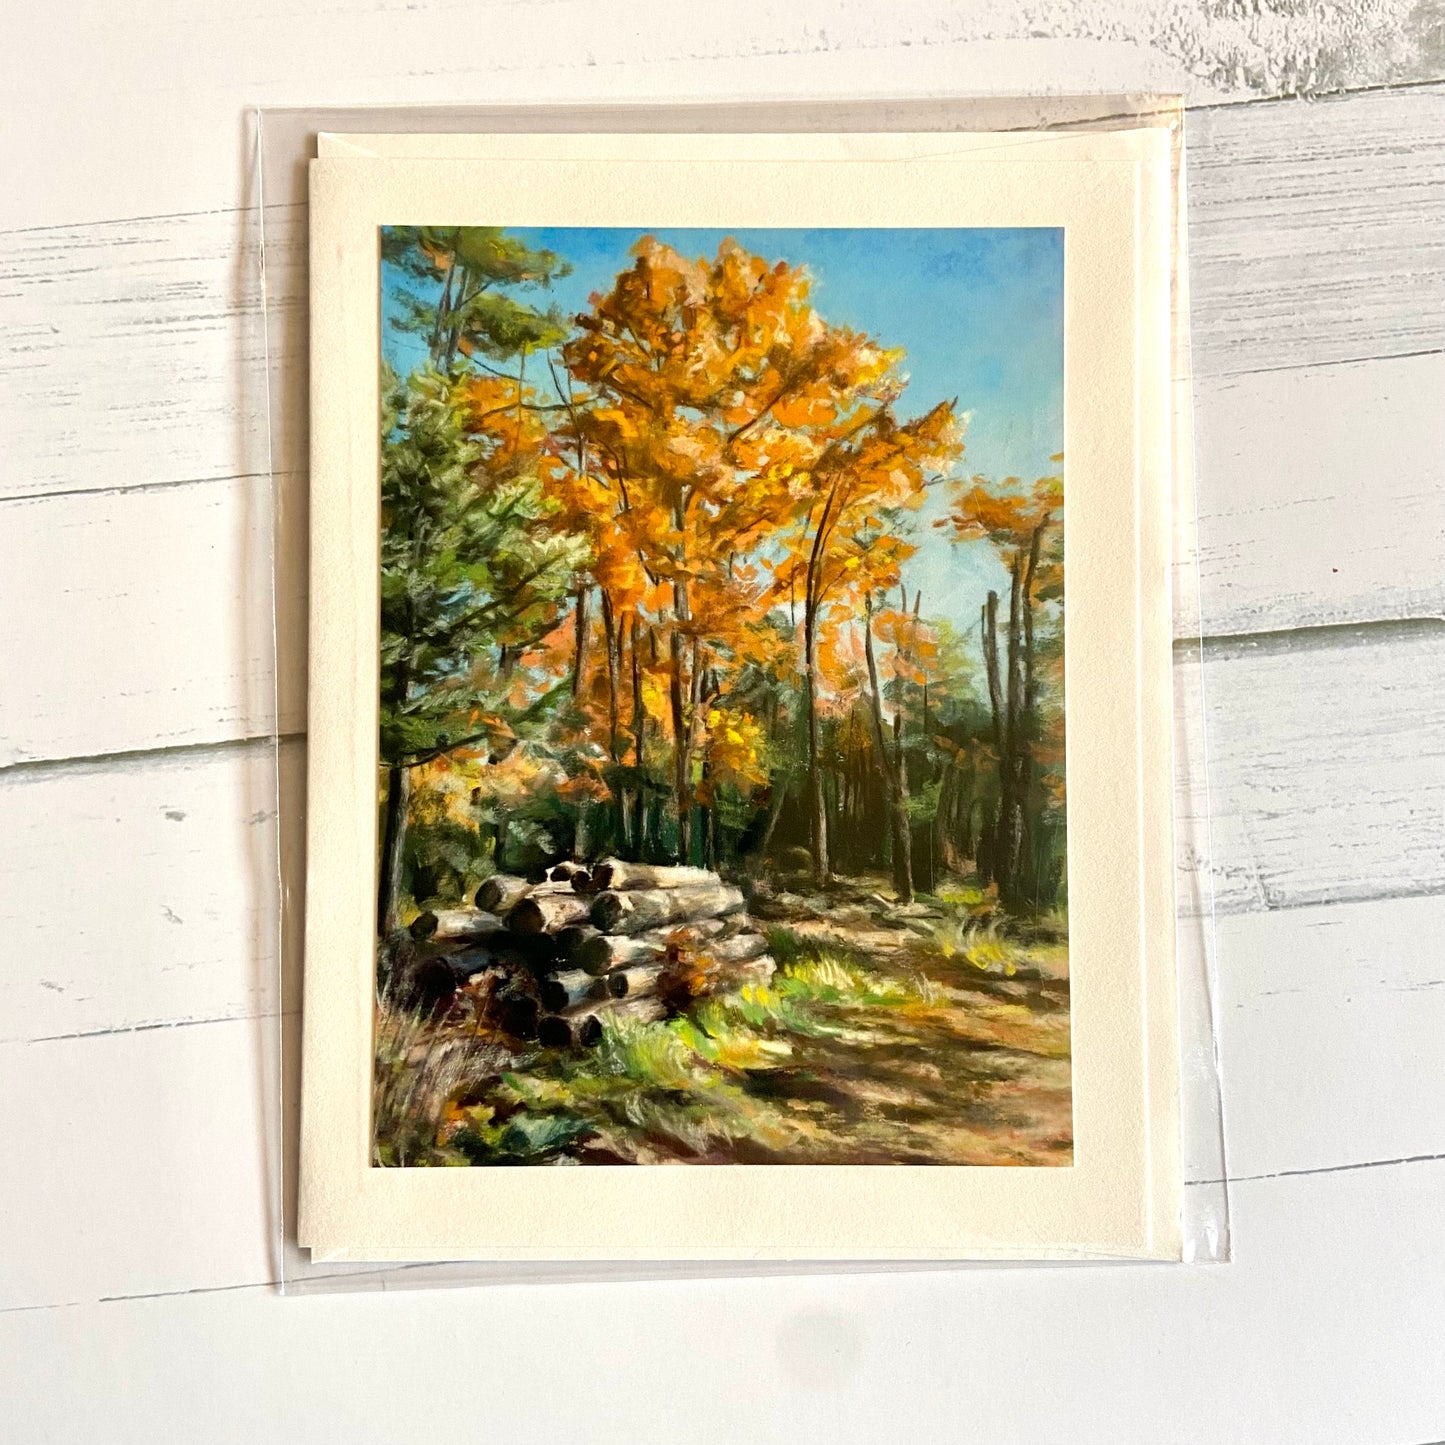 A folded cream greeting card depicting my pastel painting, "Free Dry Wood, Pick Up Only." Tall autumn orange trees rise into a clear blue sky, while on the ground in front of them is a pile of cut dry logs.